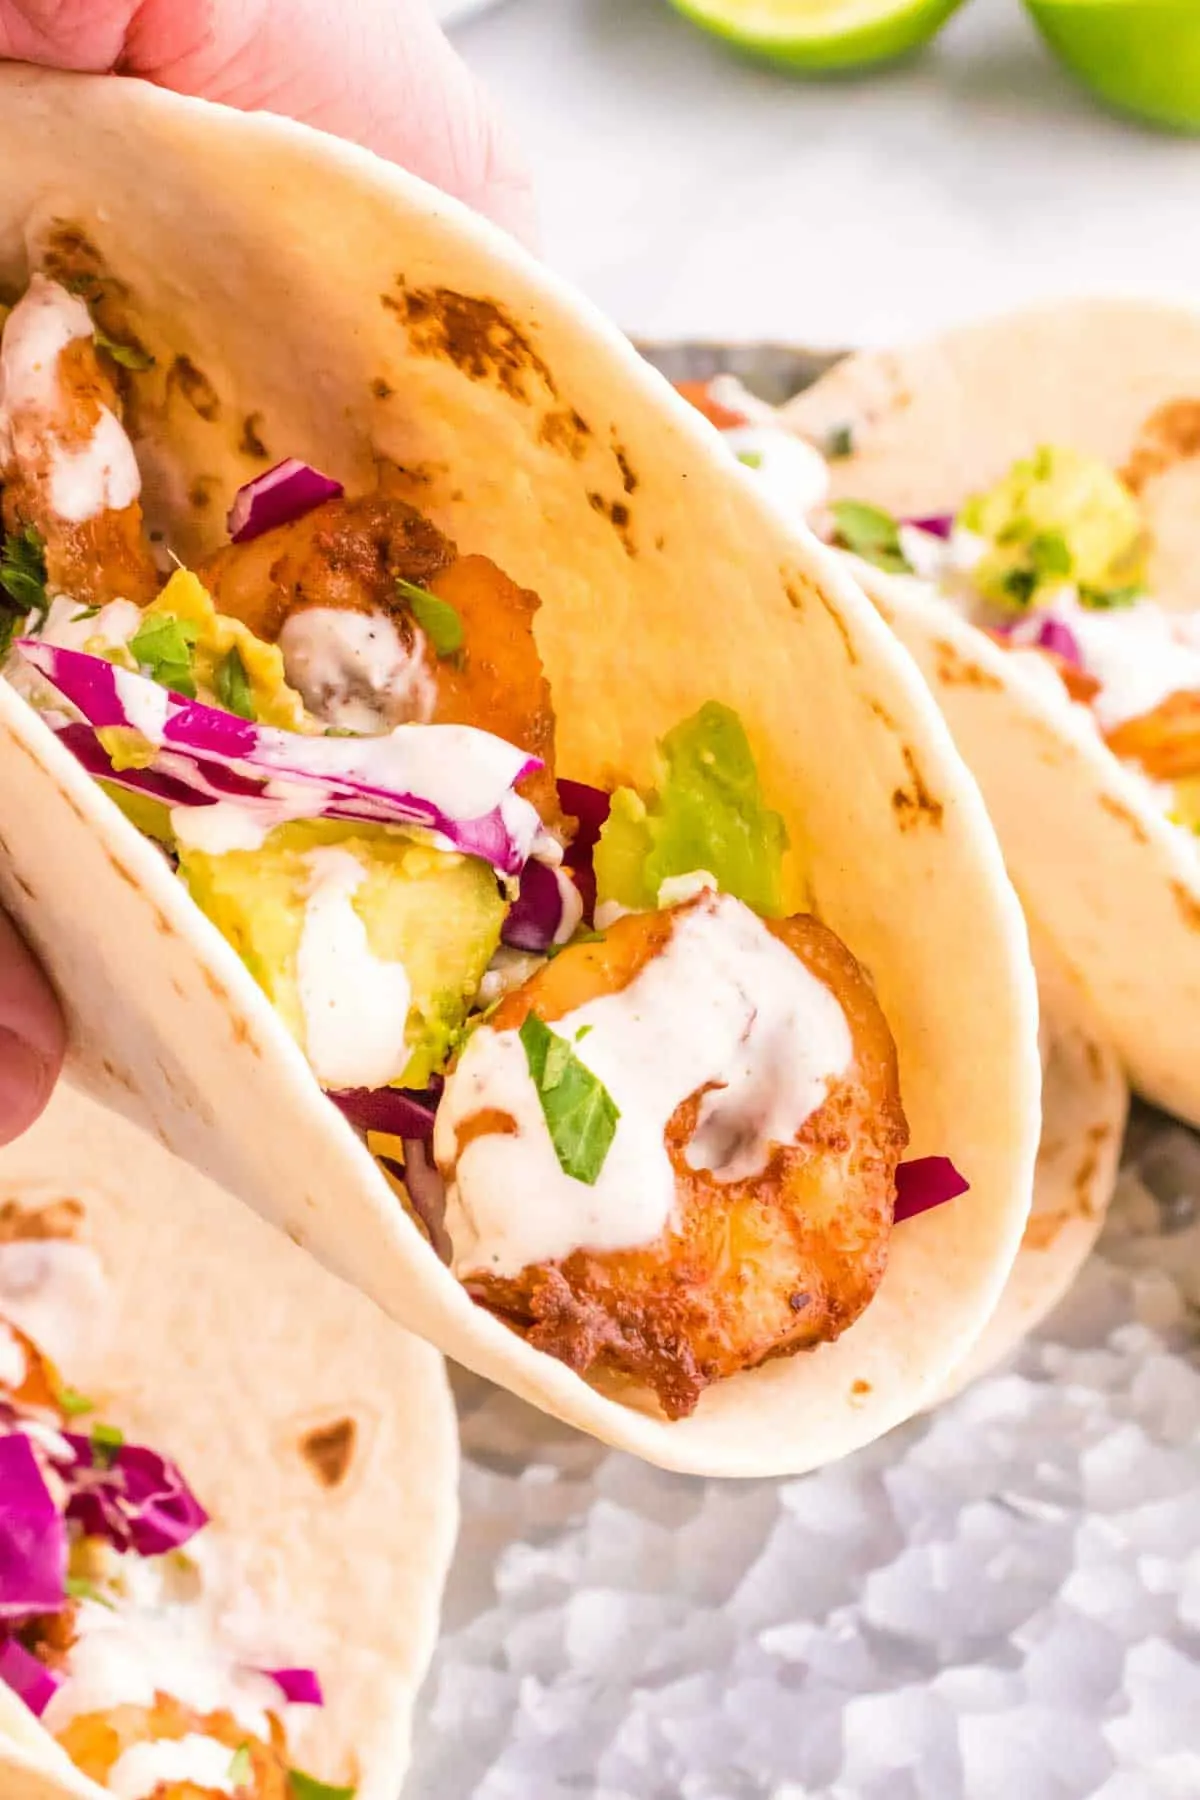 Cilantro Lime Shrimp Tacos are tasty tacos with seasoned shrimp, sliced red cabbage, diced avocados and a creamy dressing made with mayo, Greek yogurt, lime juice and cilantro.